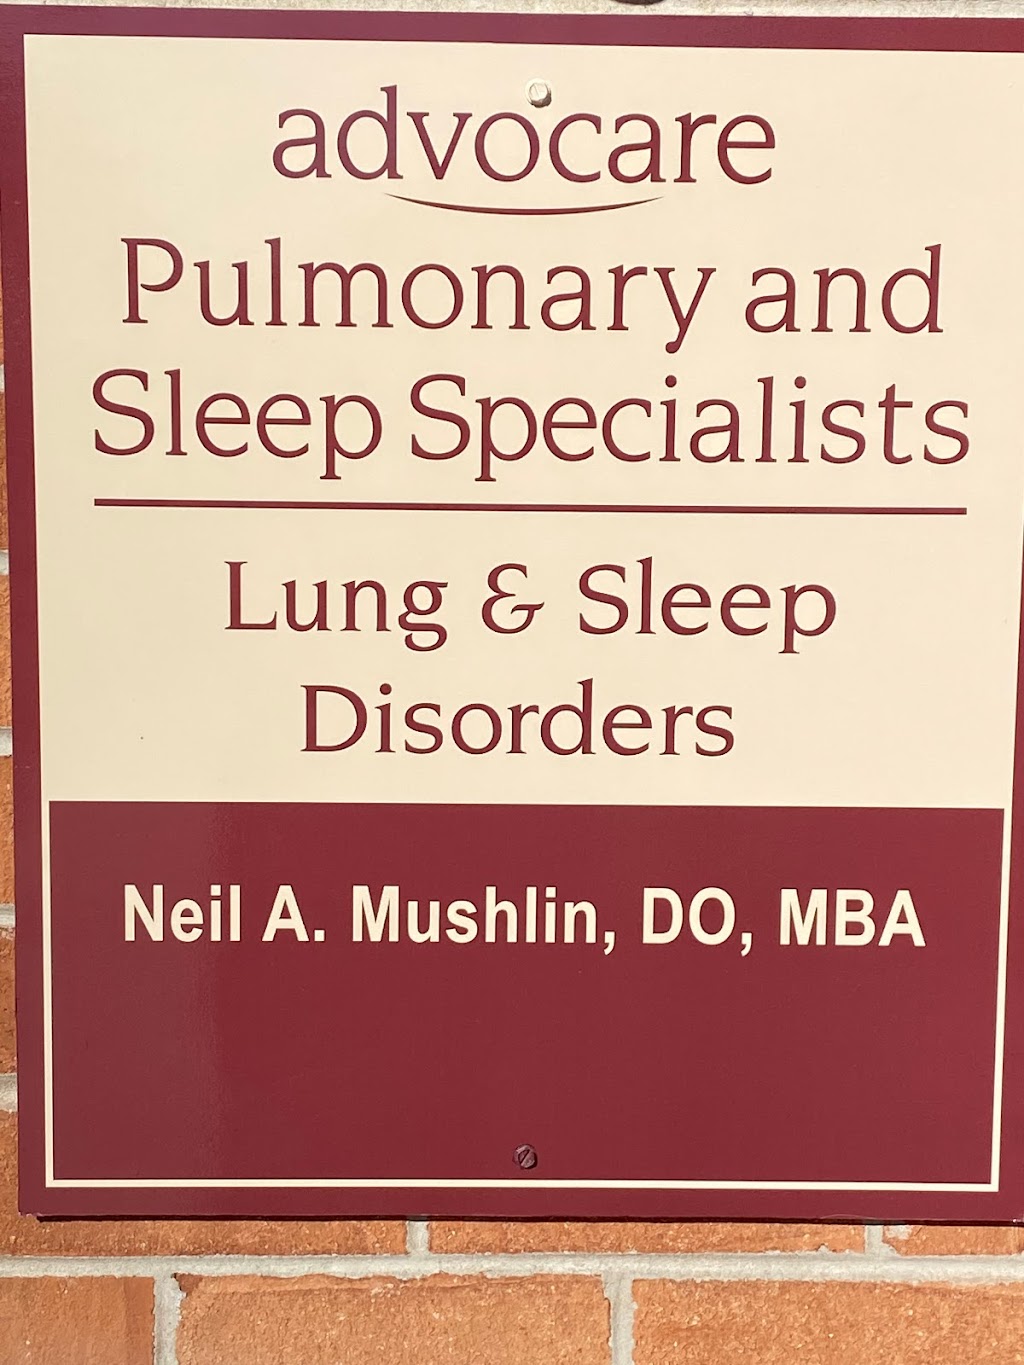 Advocare Pulmonary & Sleep Specialists: Neil A. Mushlin, DO, MBA | 1593 McDaniel Dr, West Chester, PA 19380 | Phone: (484) 999-2100